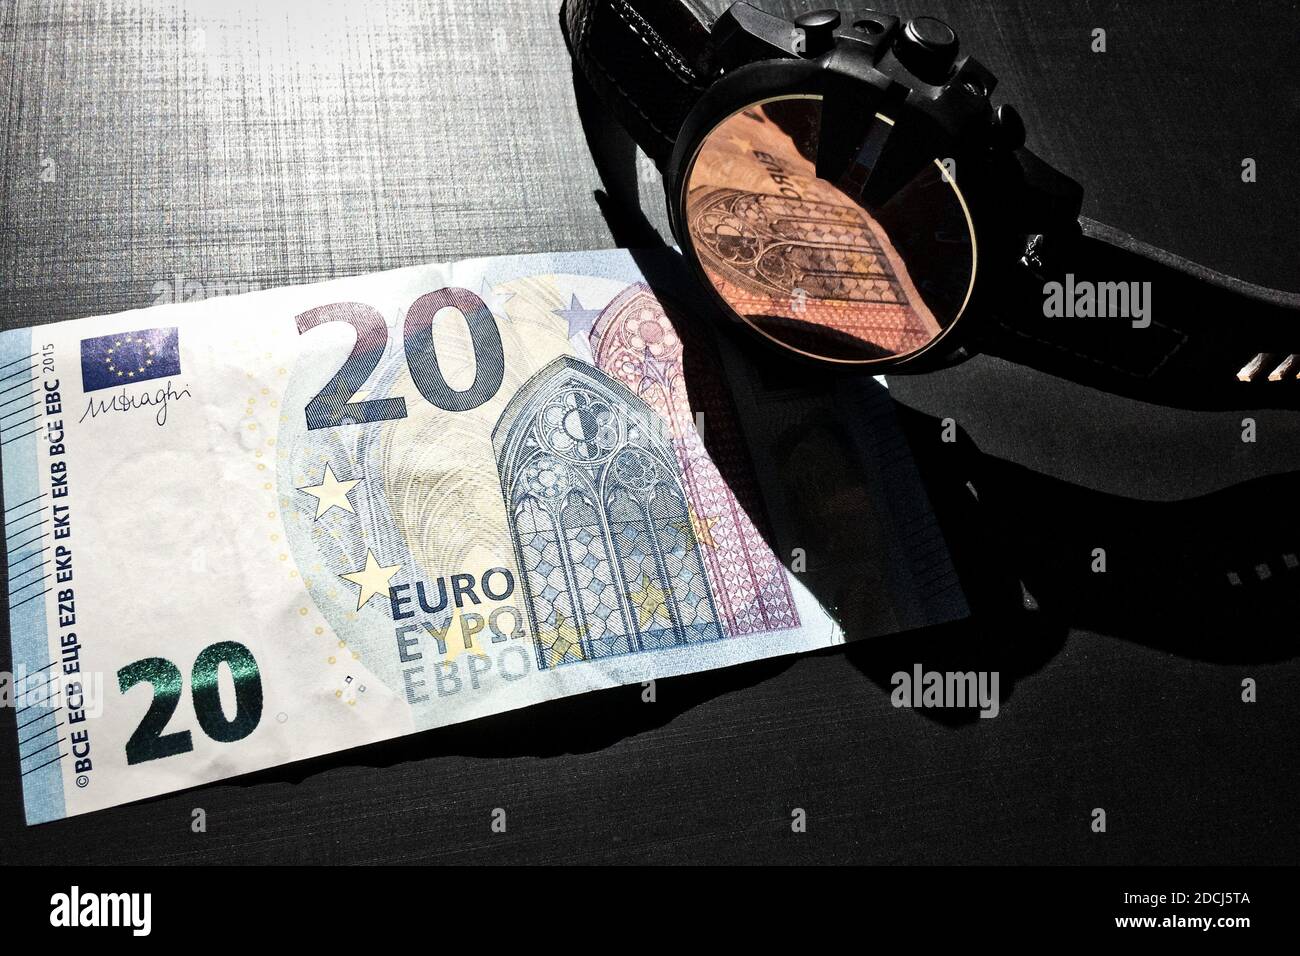 wrist watch with leather strap near the banknote on a dark background, watch on top of money, time is money, wristwatch, European currency, twenty eur Stock Photo